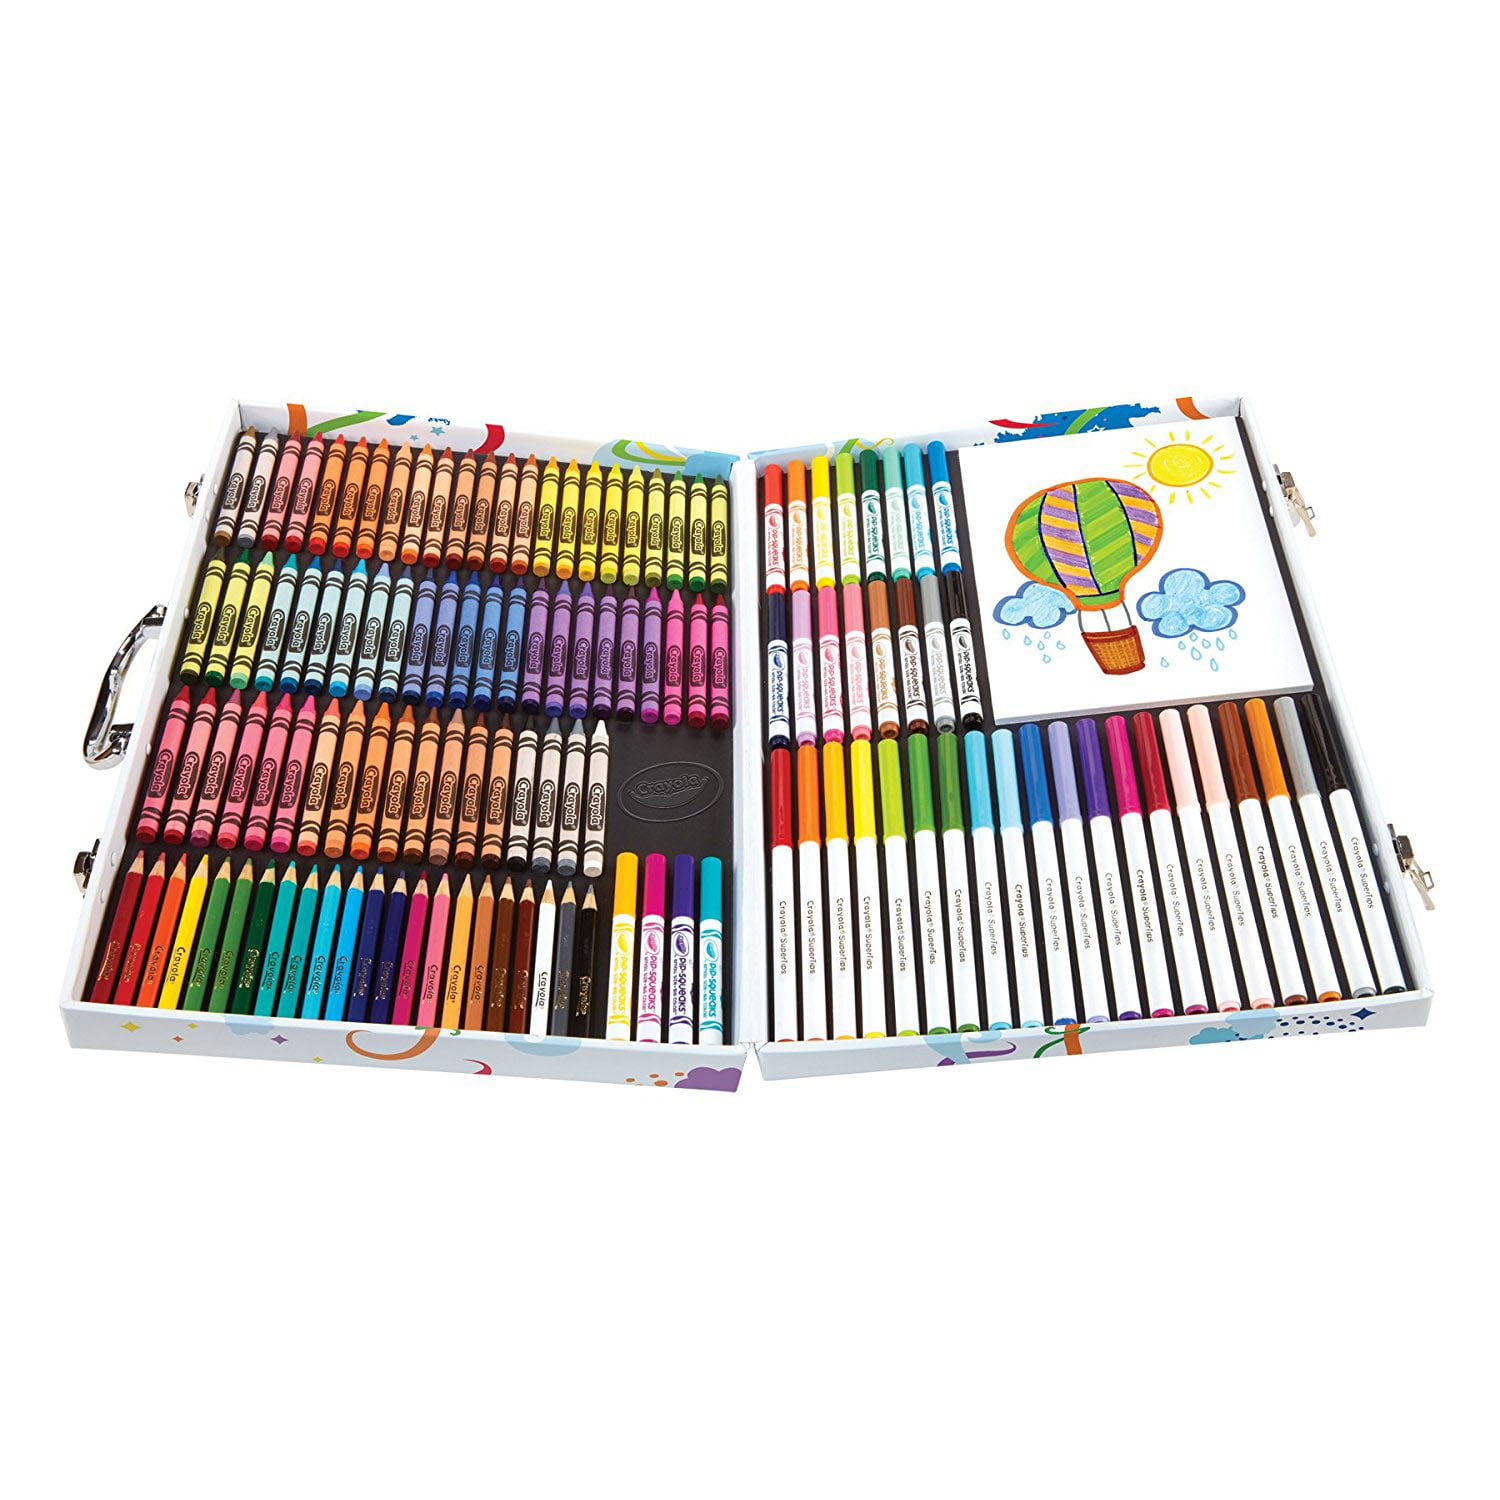 Shop for the Crayola® Inspiration Art Case Set at Michaels